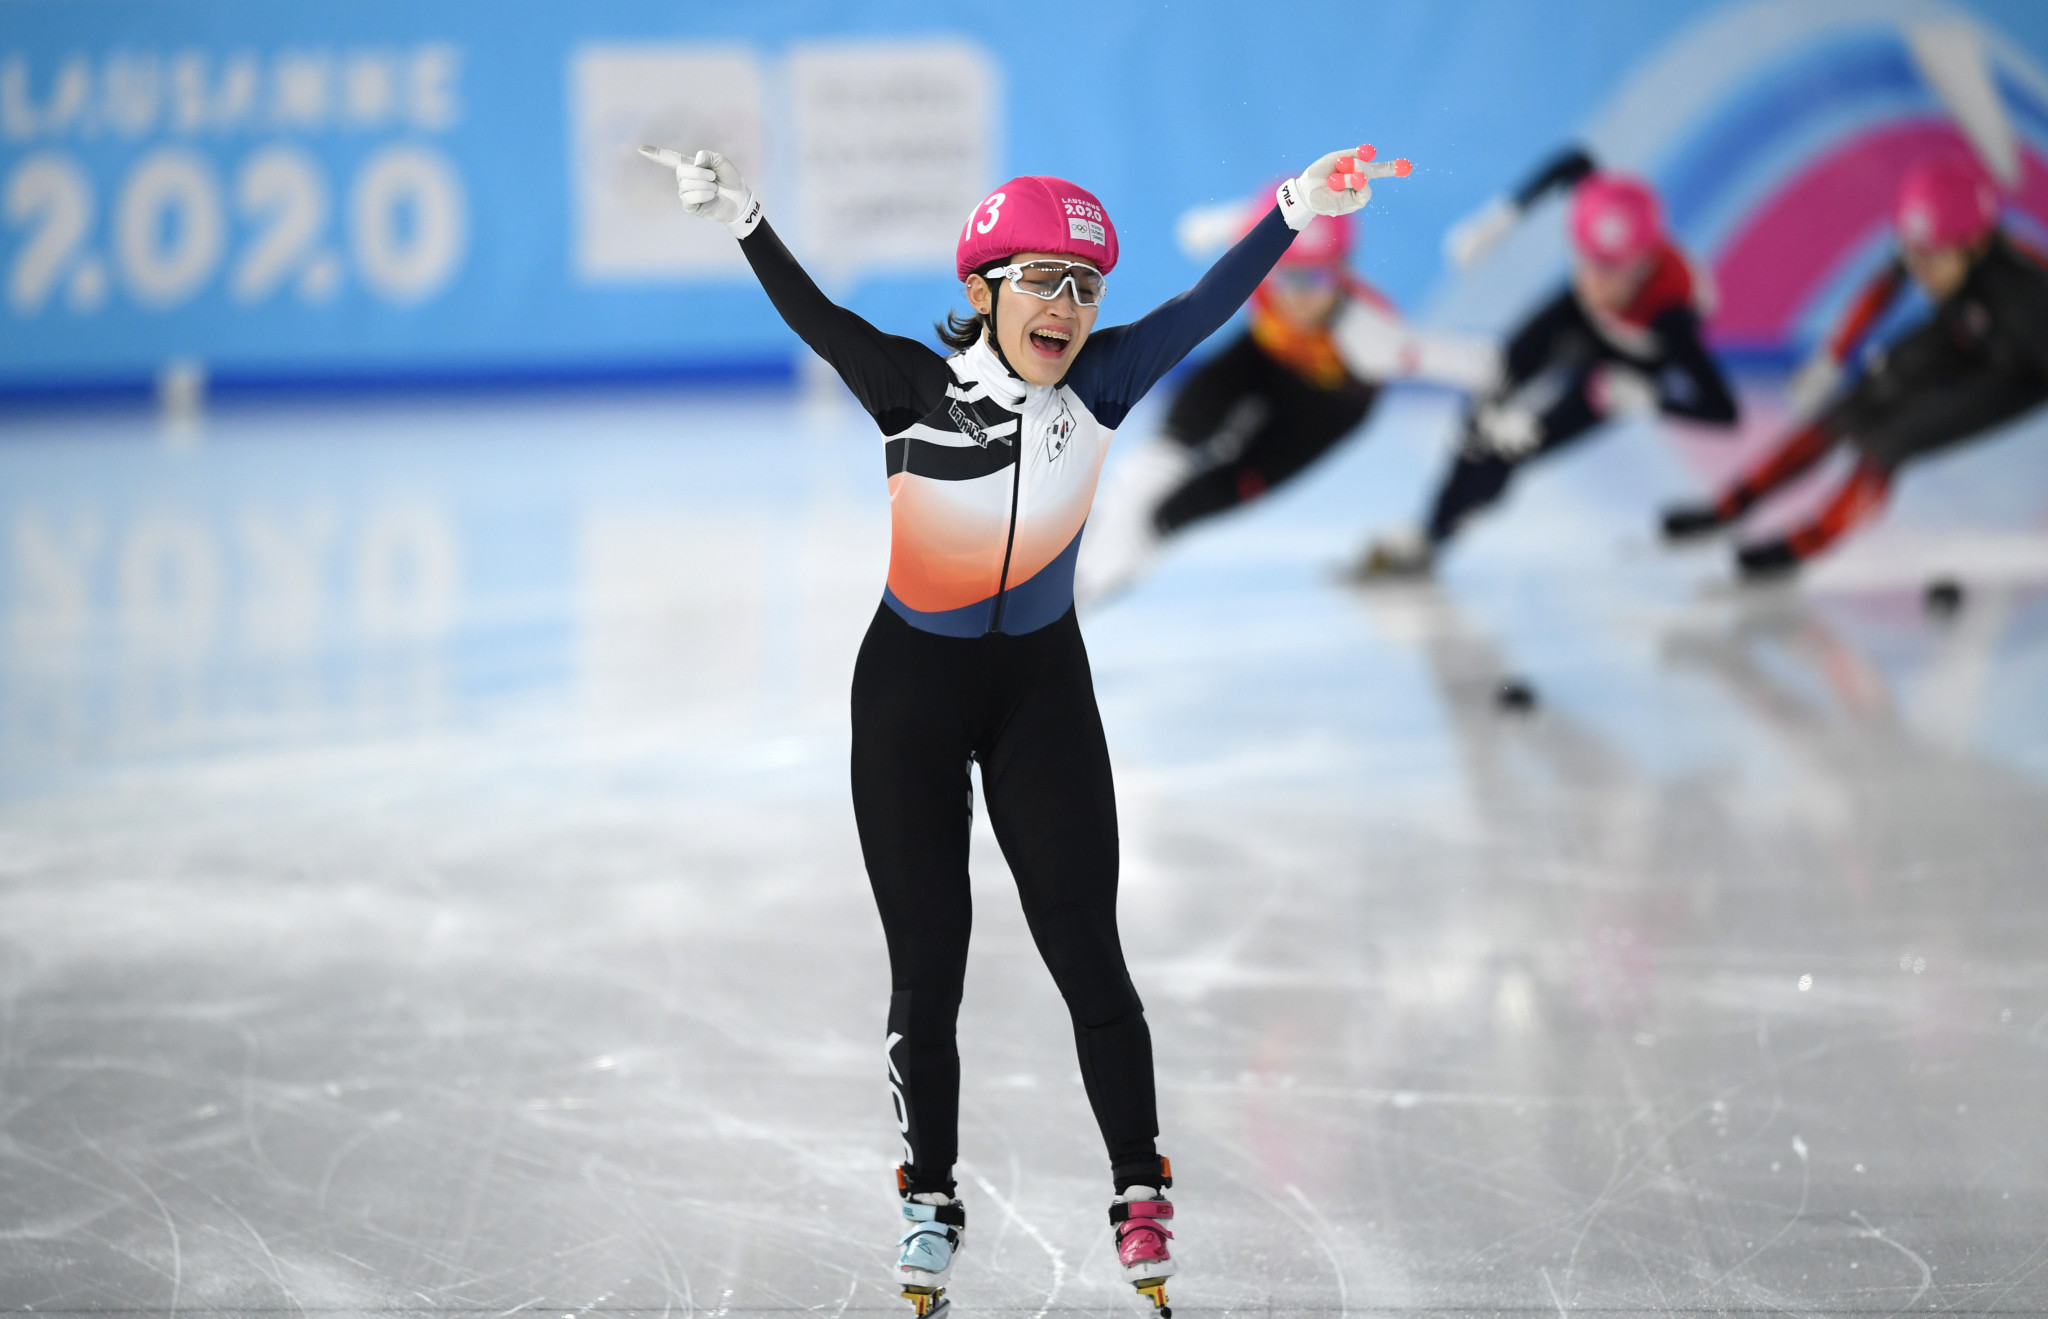 South Korea's Seo Whi-min has clean ice as she dominated the women's 500m final ©Getty Images